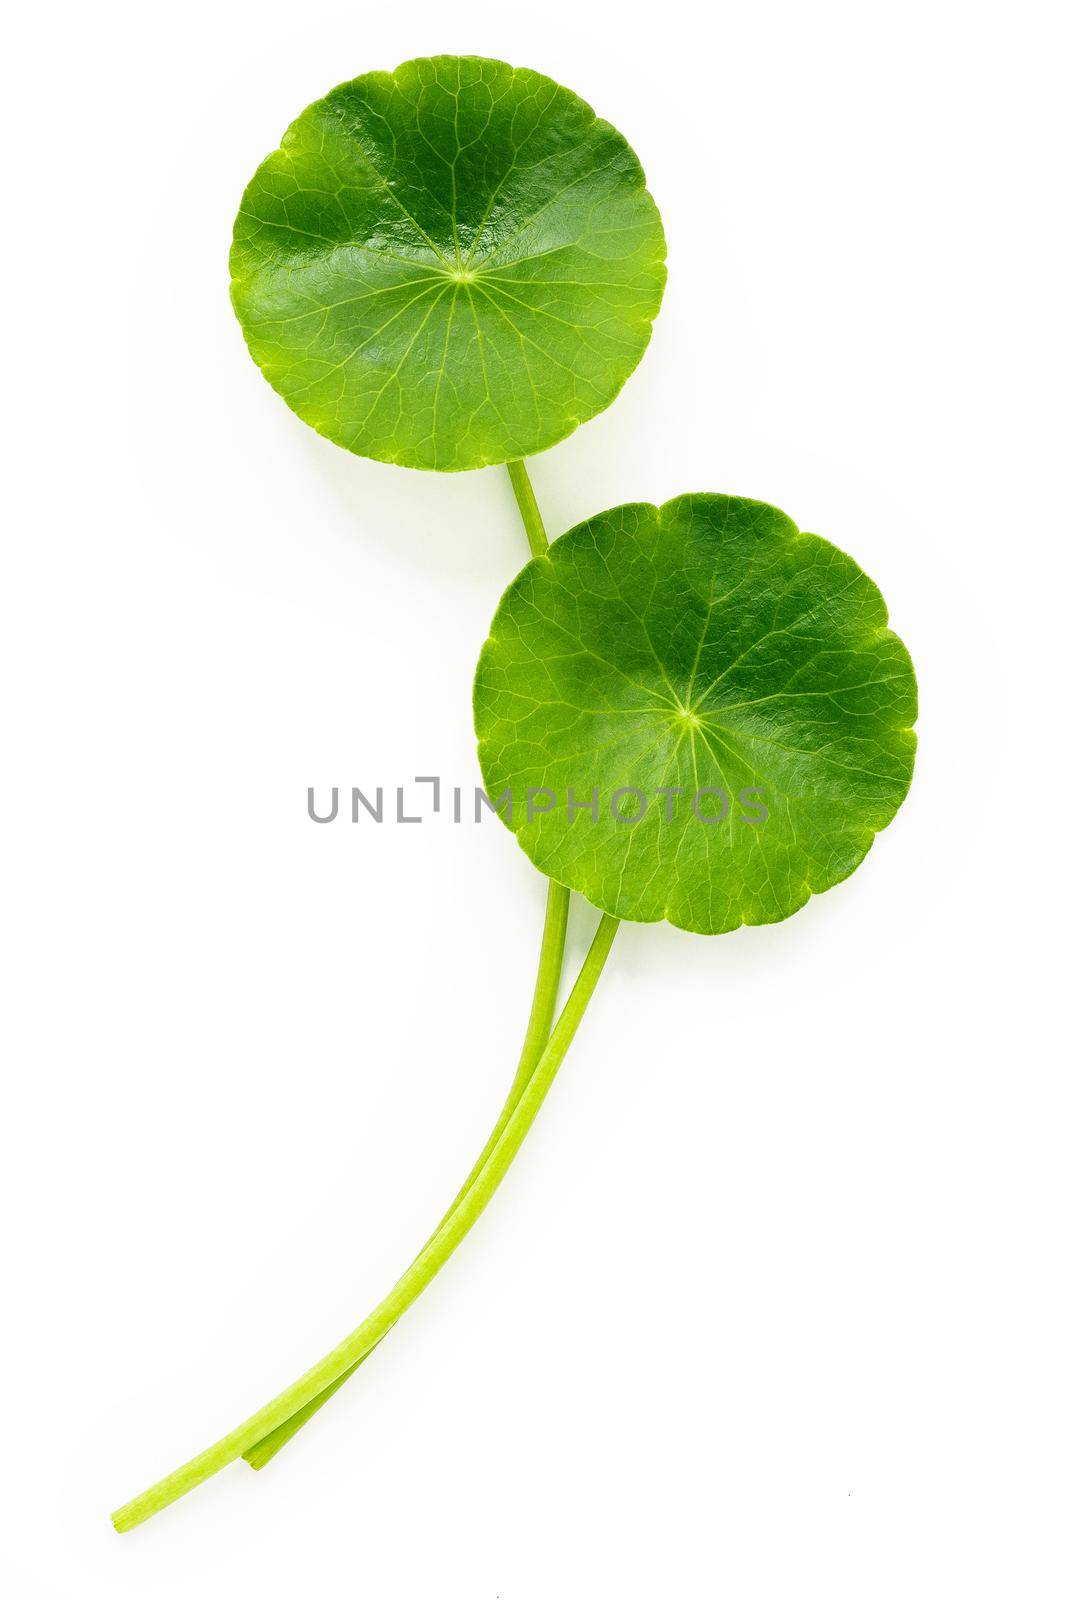 Centella asiatica leaves isolated on white background. by kerdkanno